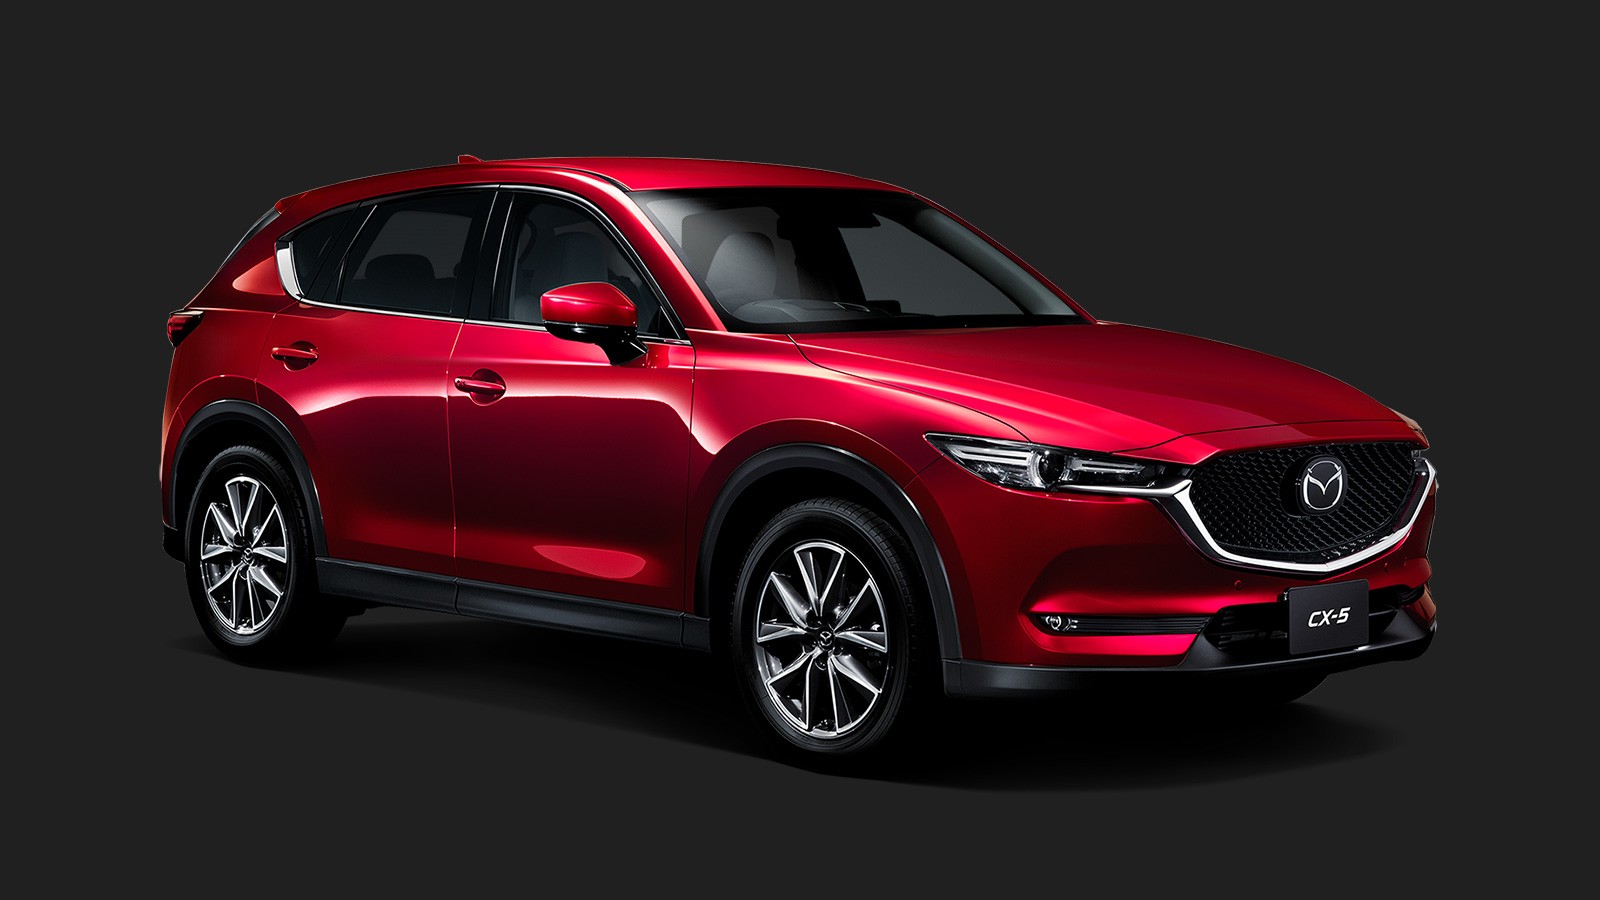 2017 Mazda Cx 5 Specifications And Prices Revealed For Japan